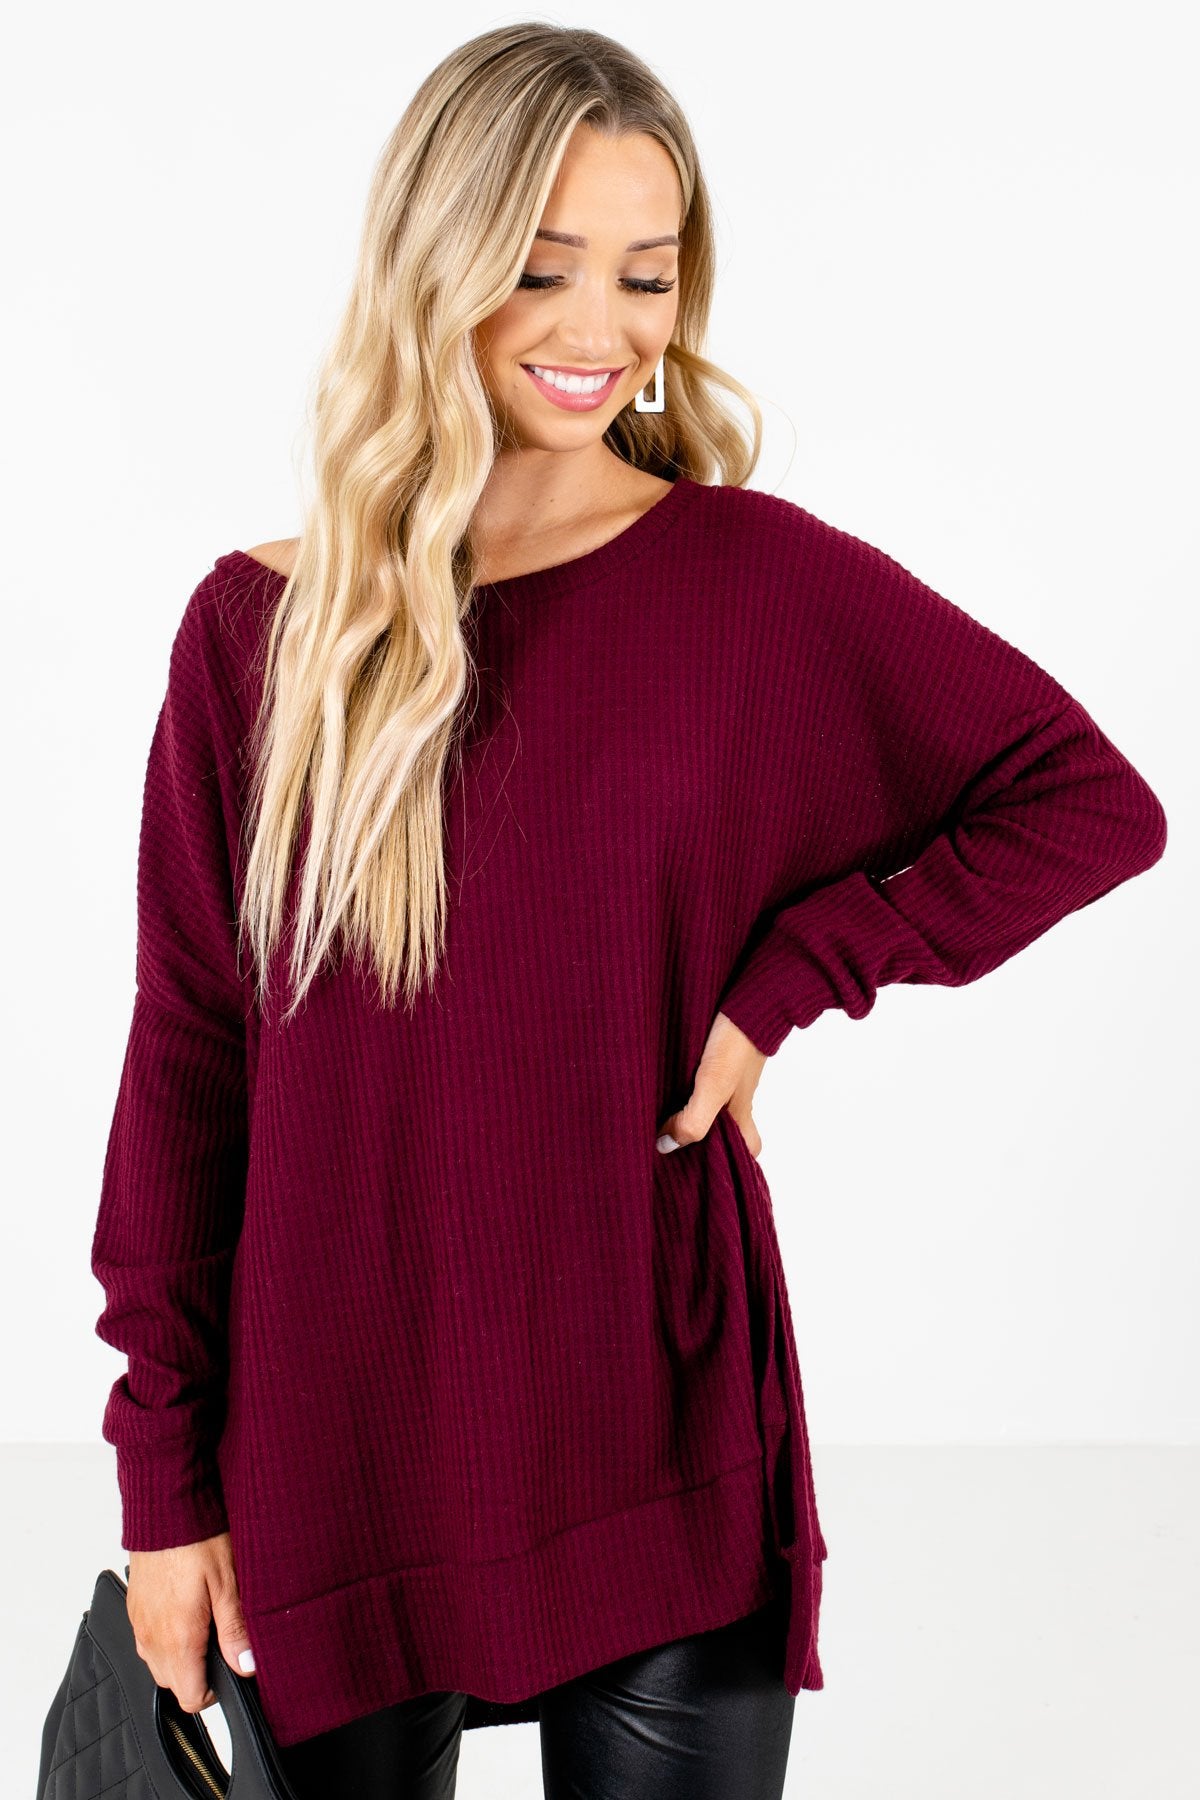 Women’s Burgundy Cozy and Warm Boutique Tops